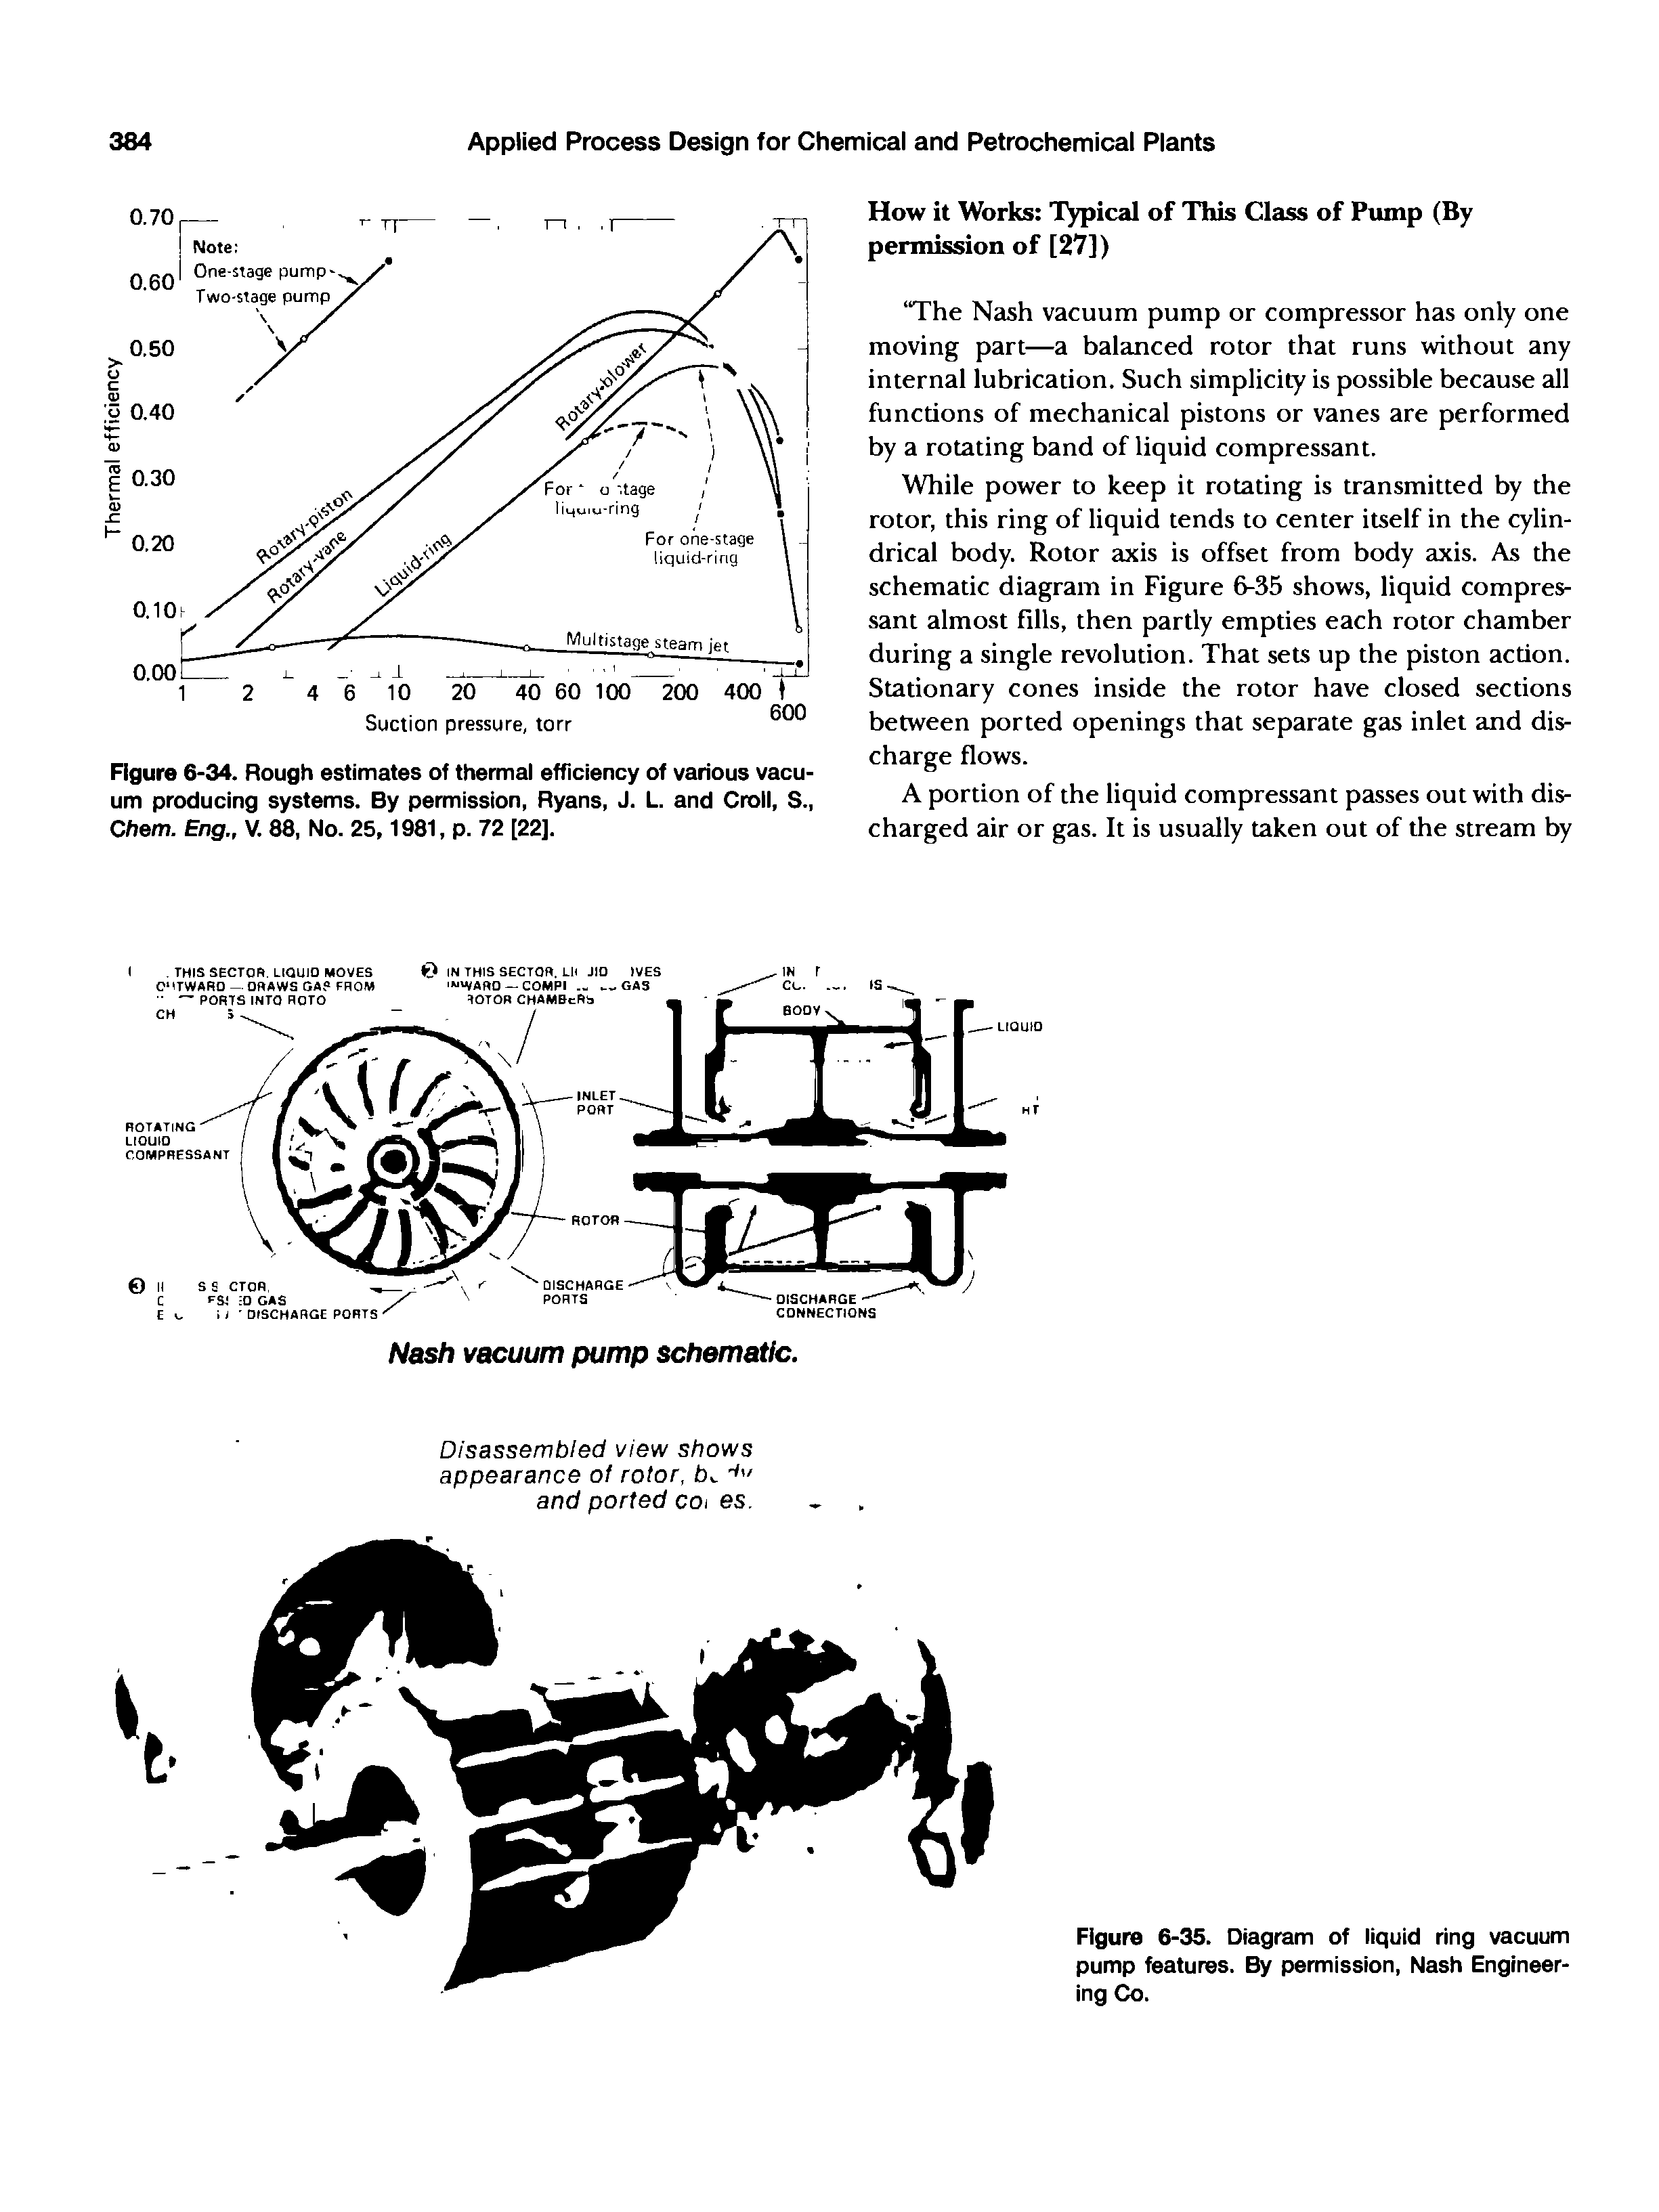 Figure 6-34. Rough estimates of thermal efficiency of various vacuum producing systems. By permission, Ryans, J. L. and Croll, S., Chem. Eng., V. 88, No. 25,1981, p. 72 [22].